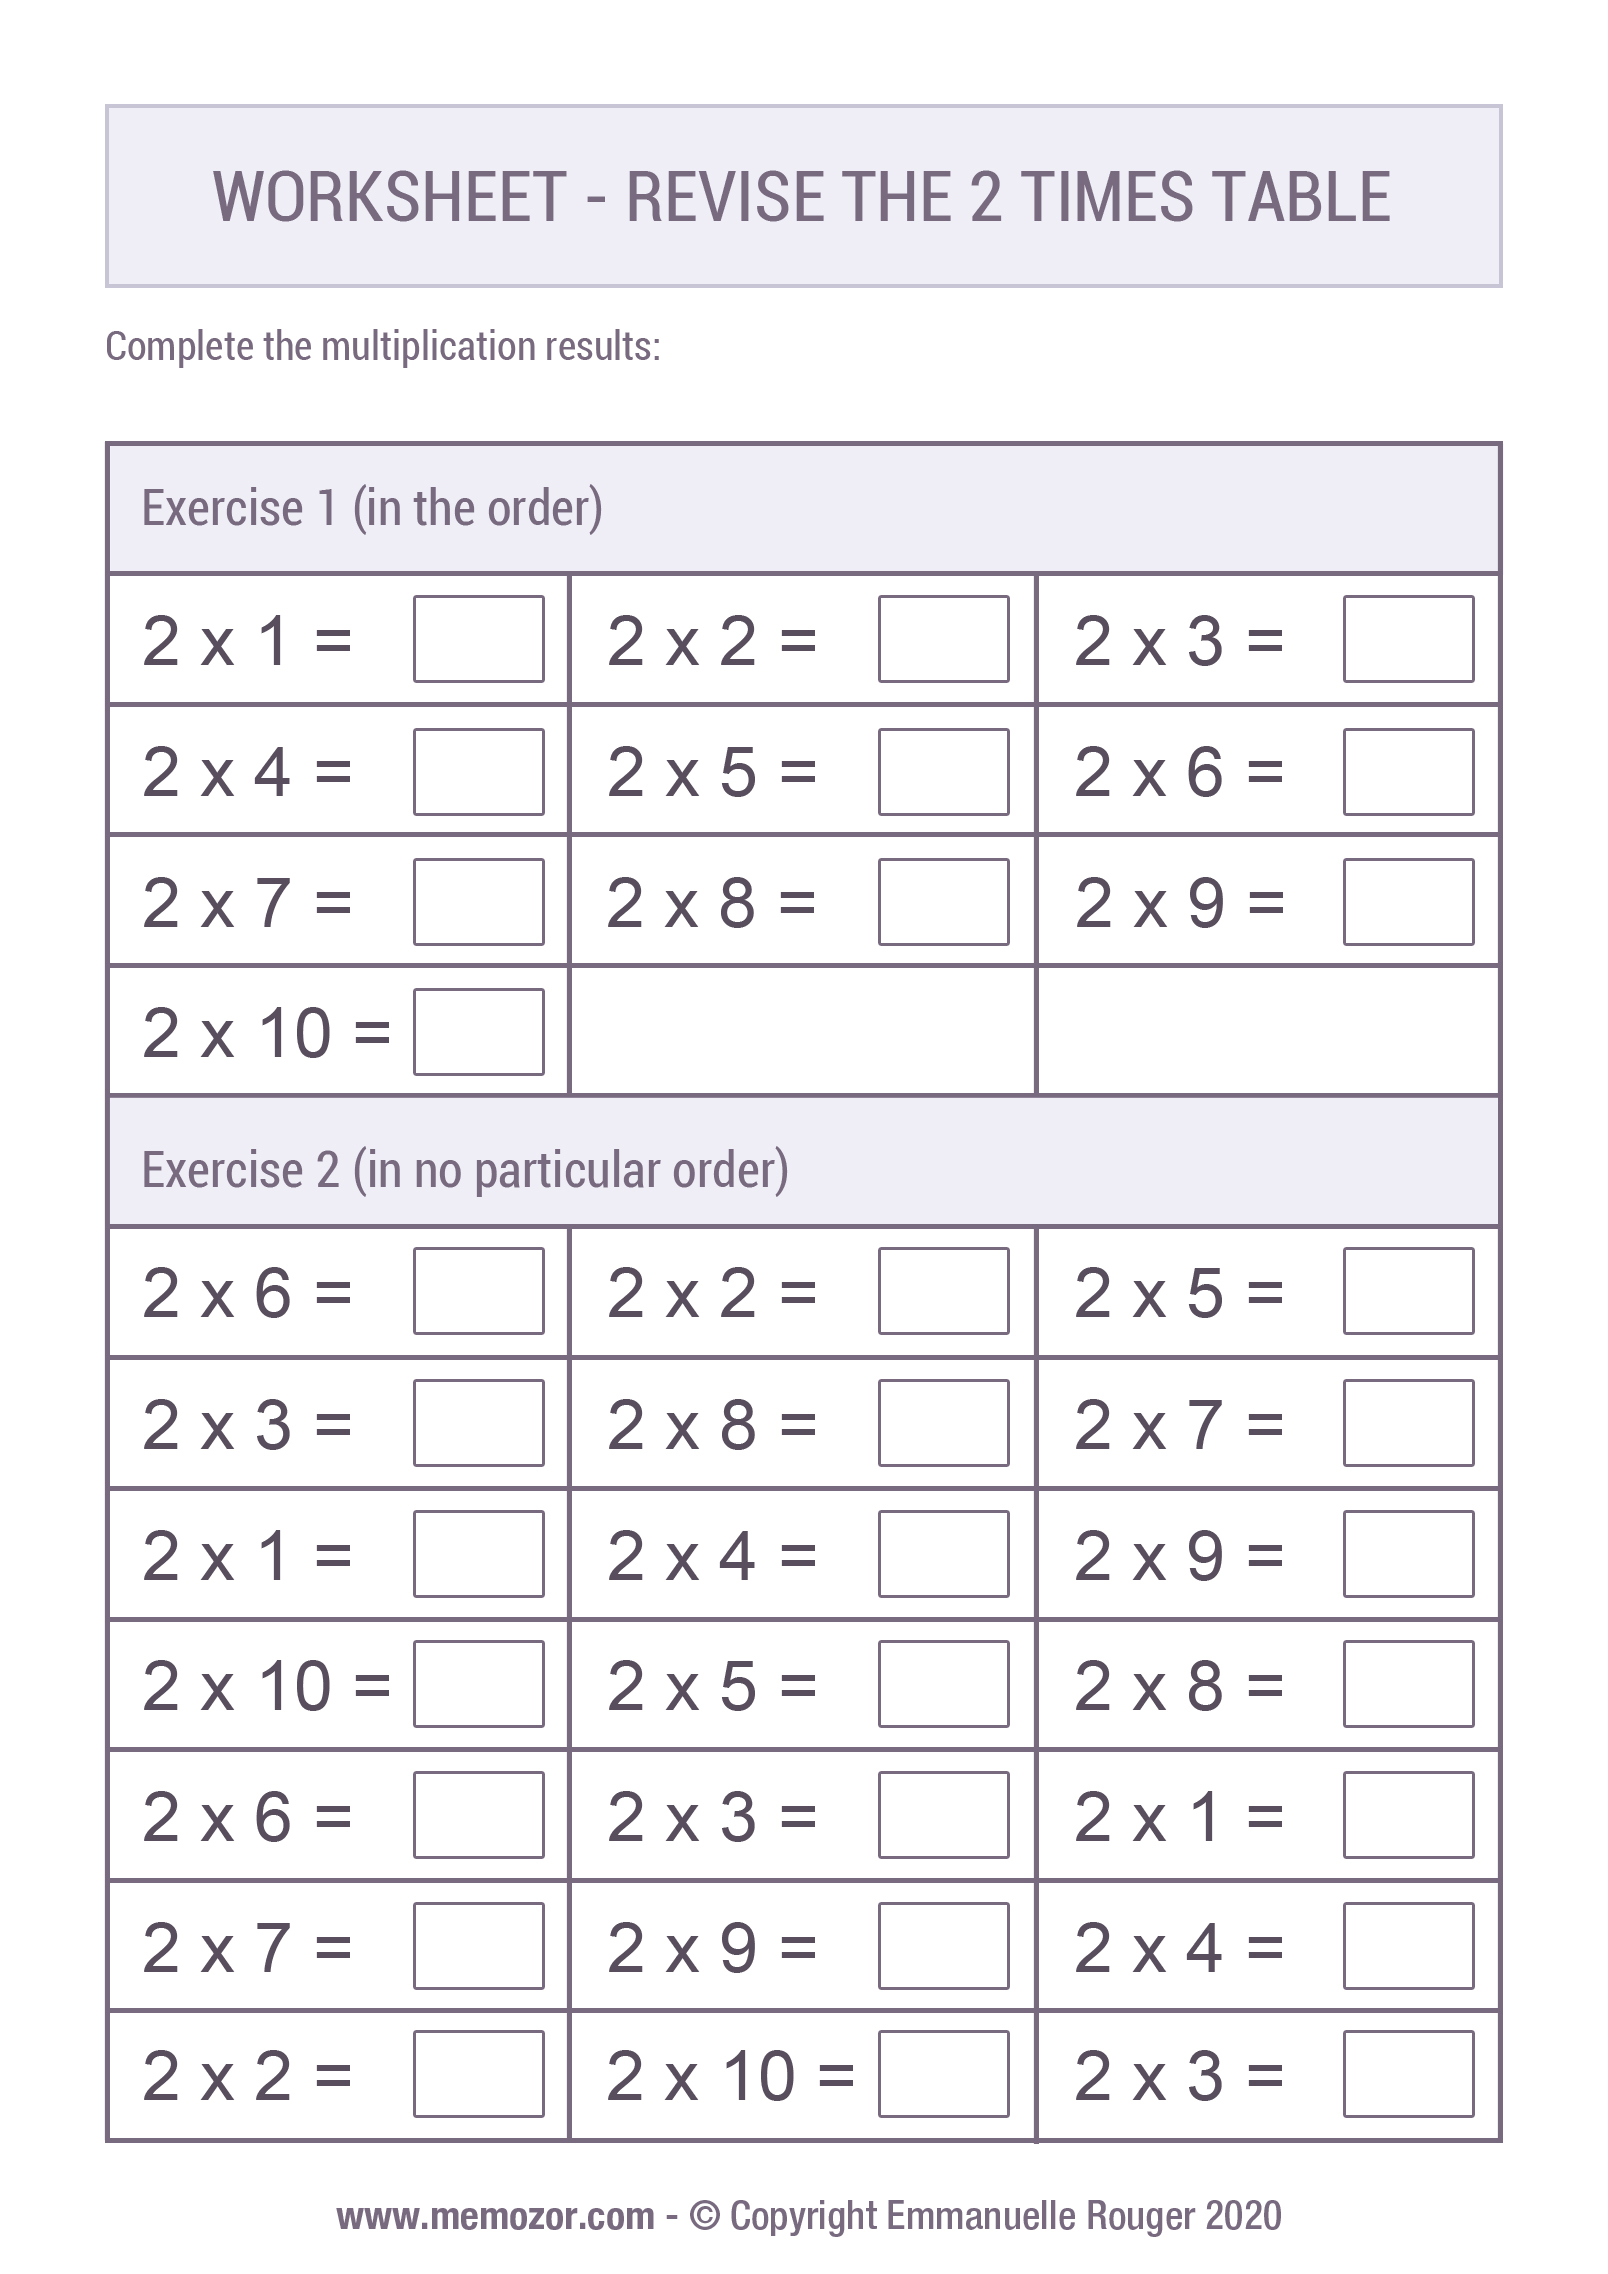 Printable Worksheet - Revise the 20 Times table  Memozor Regarding 2 Times Table Worksheet